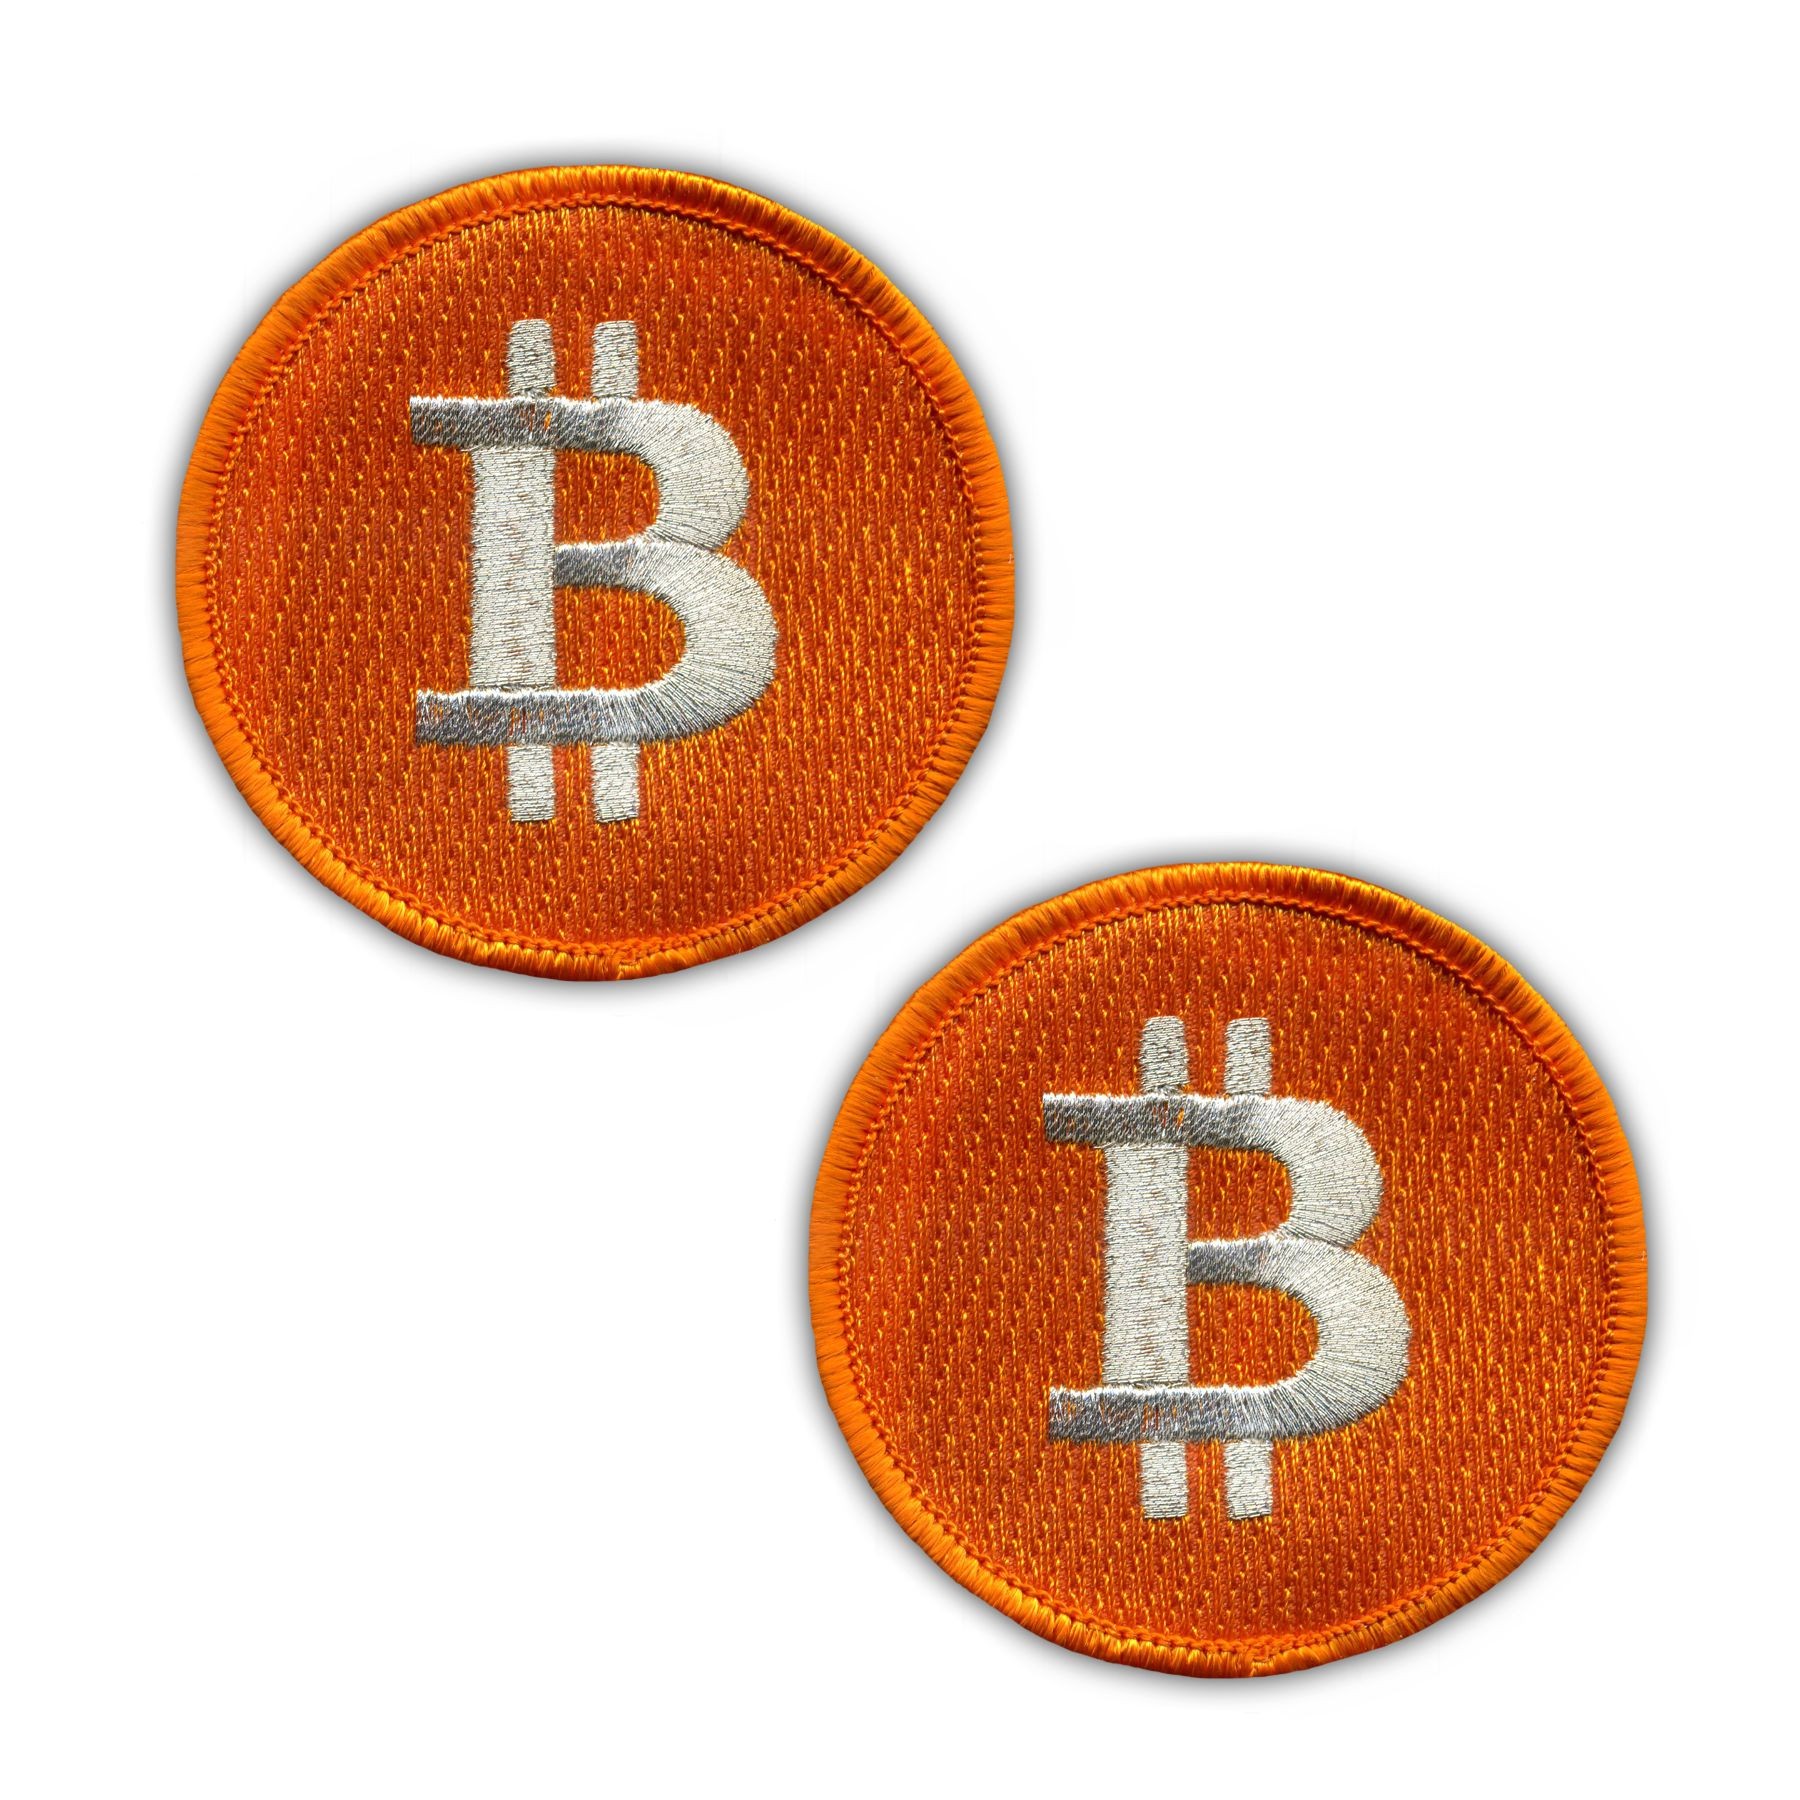 bitcoin patch)